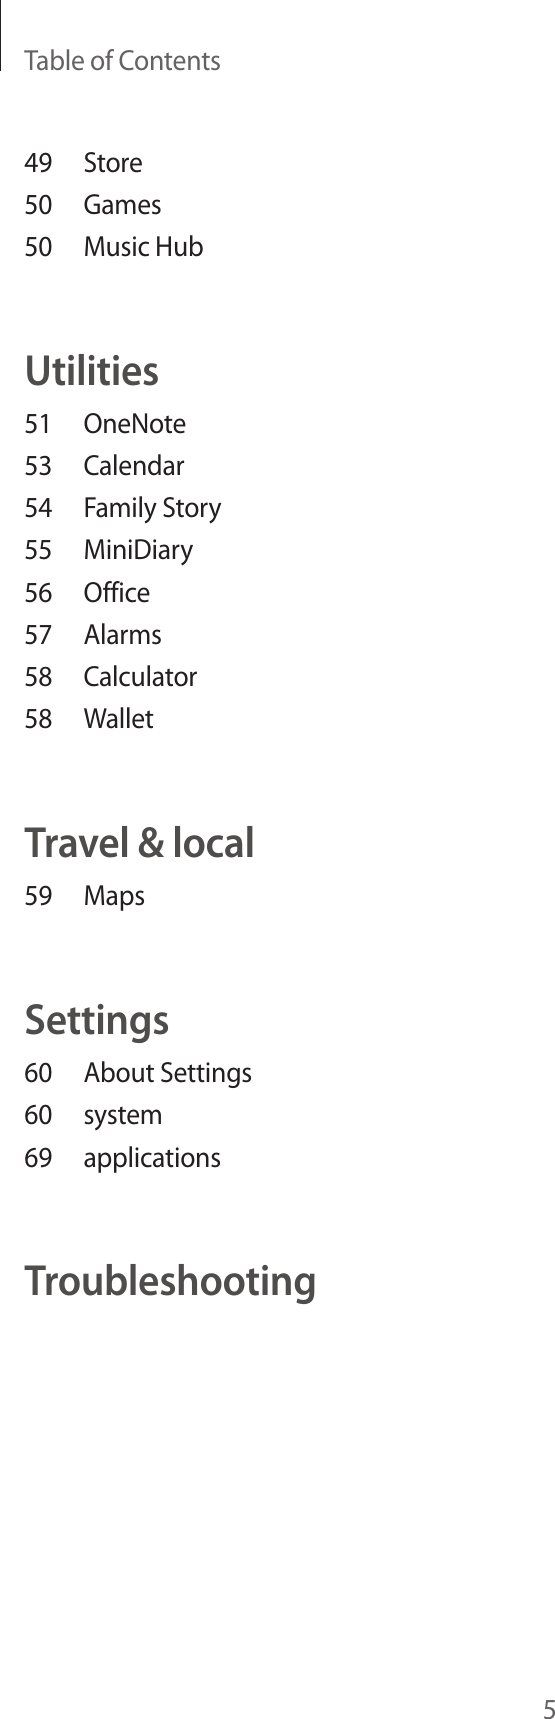 Table of Contents549 Store50 Games50  Music HubUtilities51 OneNote53 Calendar54  Family Story55 MiniDiary56 Office57 Alarms58 Calculator58 WalletTravel &amp; local59 MapsSettings60  About Settings60 system69 applicationsTroubleshooting